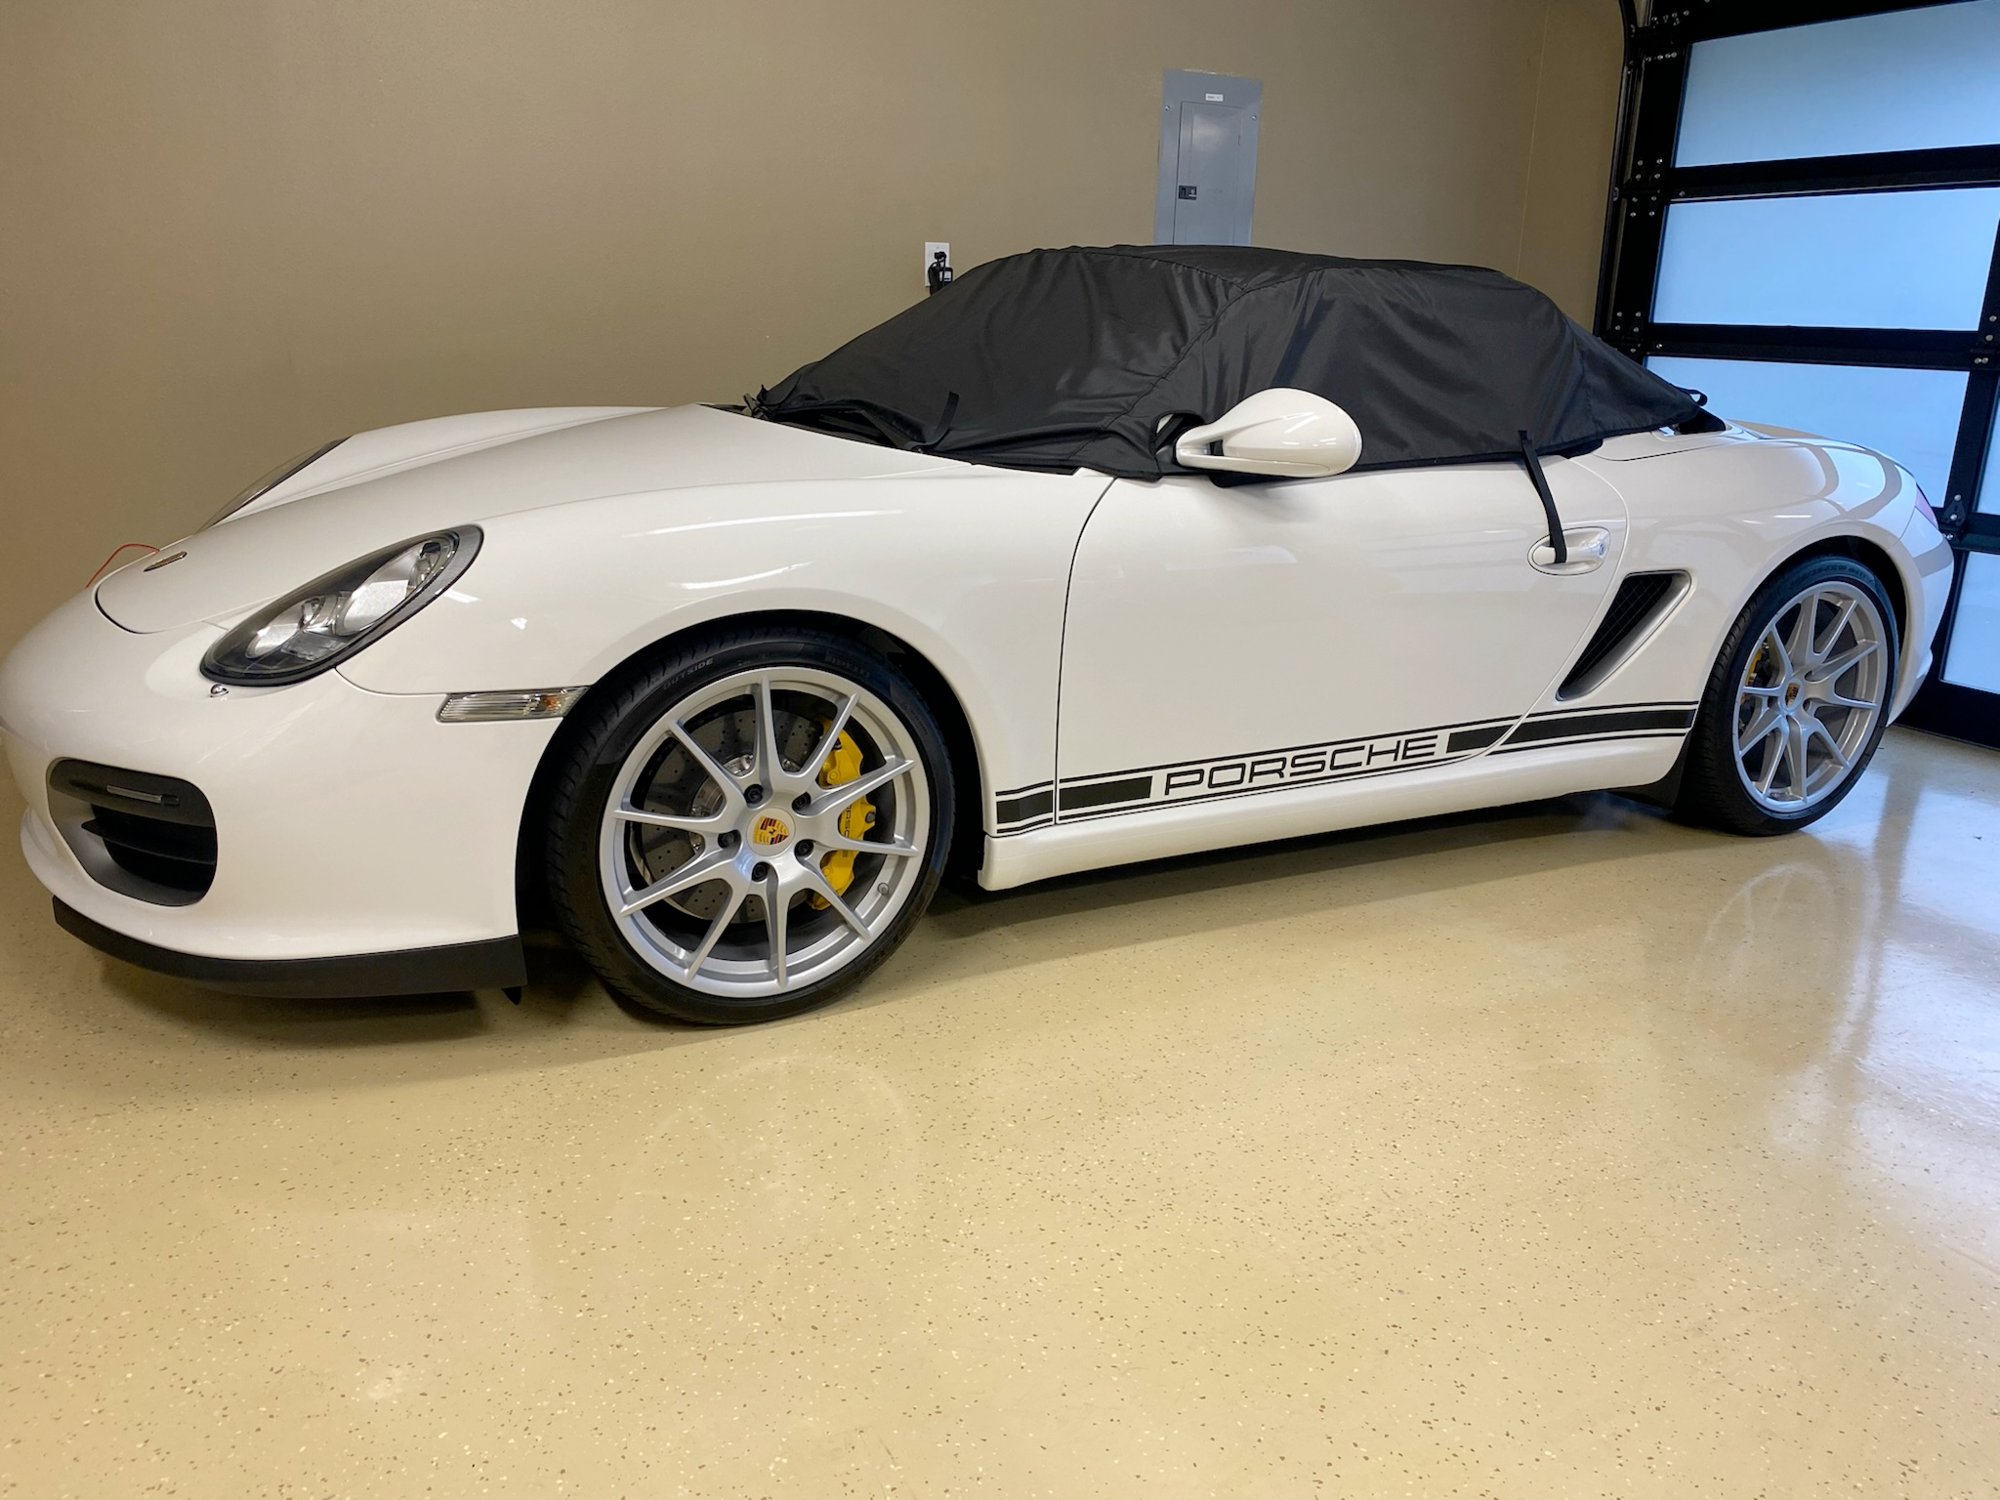 2011 Porsche Boxster - 2011 Boxster Spyder - 6 speed MT - Buckets - AC - Low Miles - Used - VIN WP0CB2A80BS745636 - 2WD - Manual - Convertible - White - Seattle, WA 98059, United States